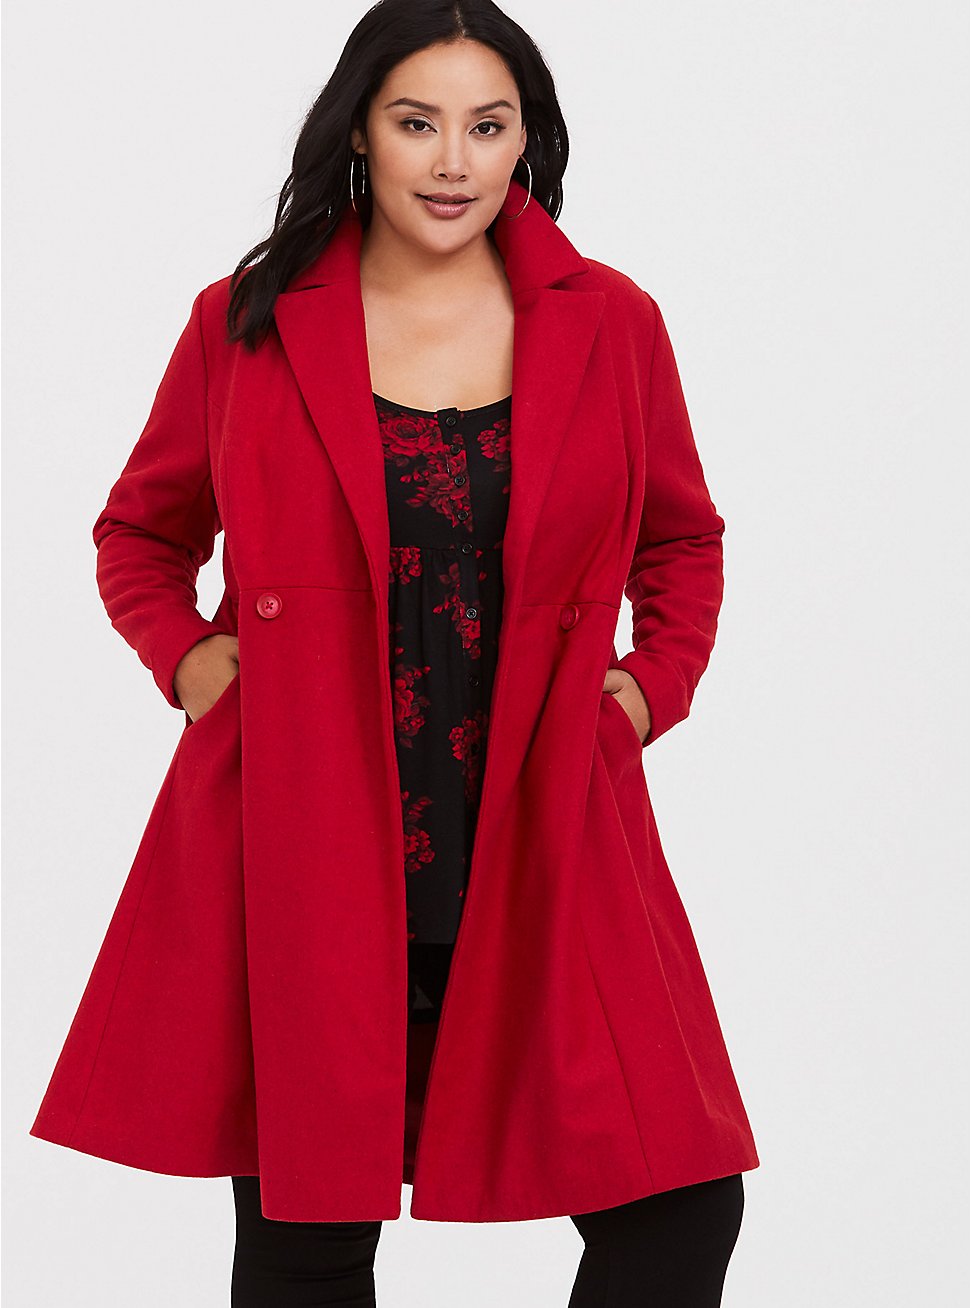 Wool Fit And Flare Coat, RASPBERRY CORDIAL, hi-res